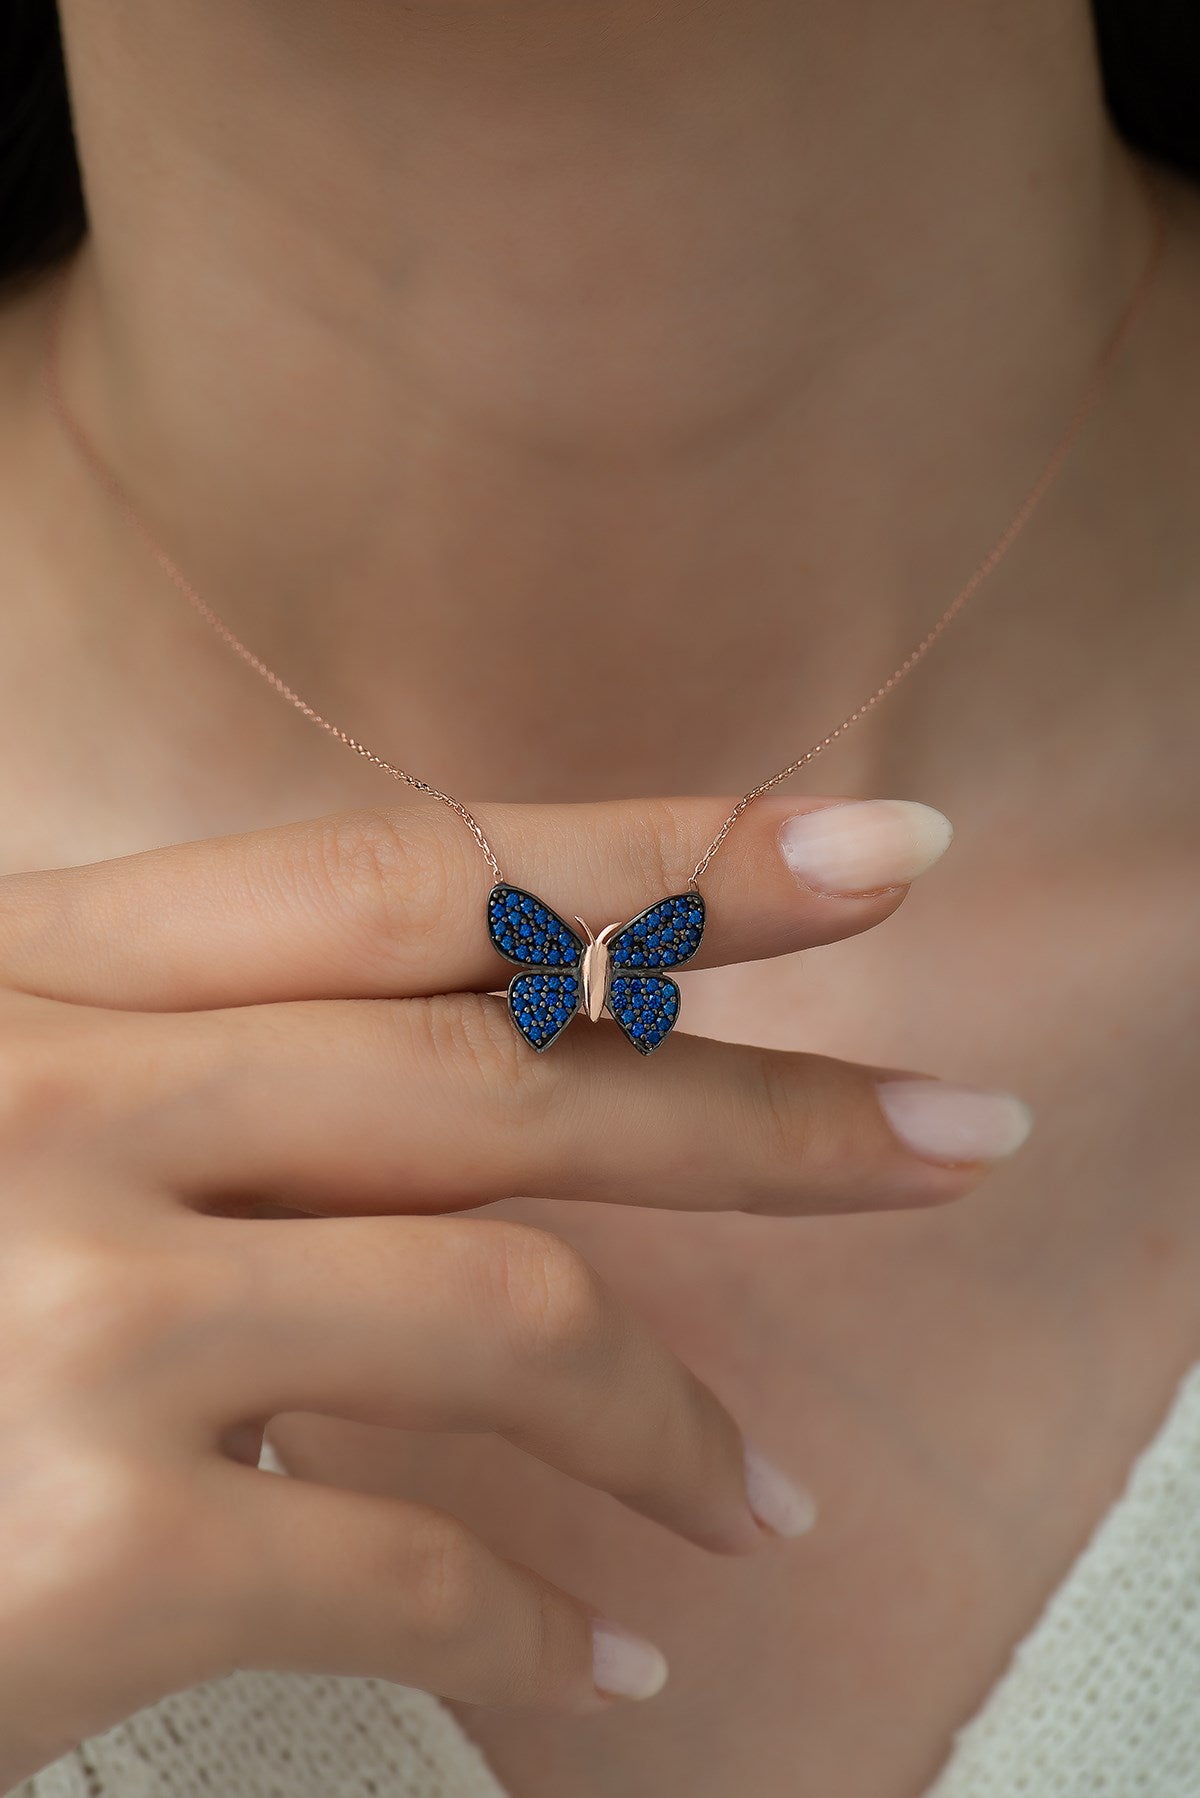 Blue Murano Glass Butterfly Necklace Set